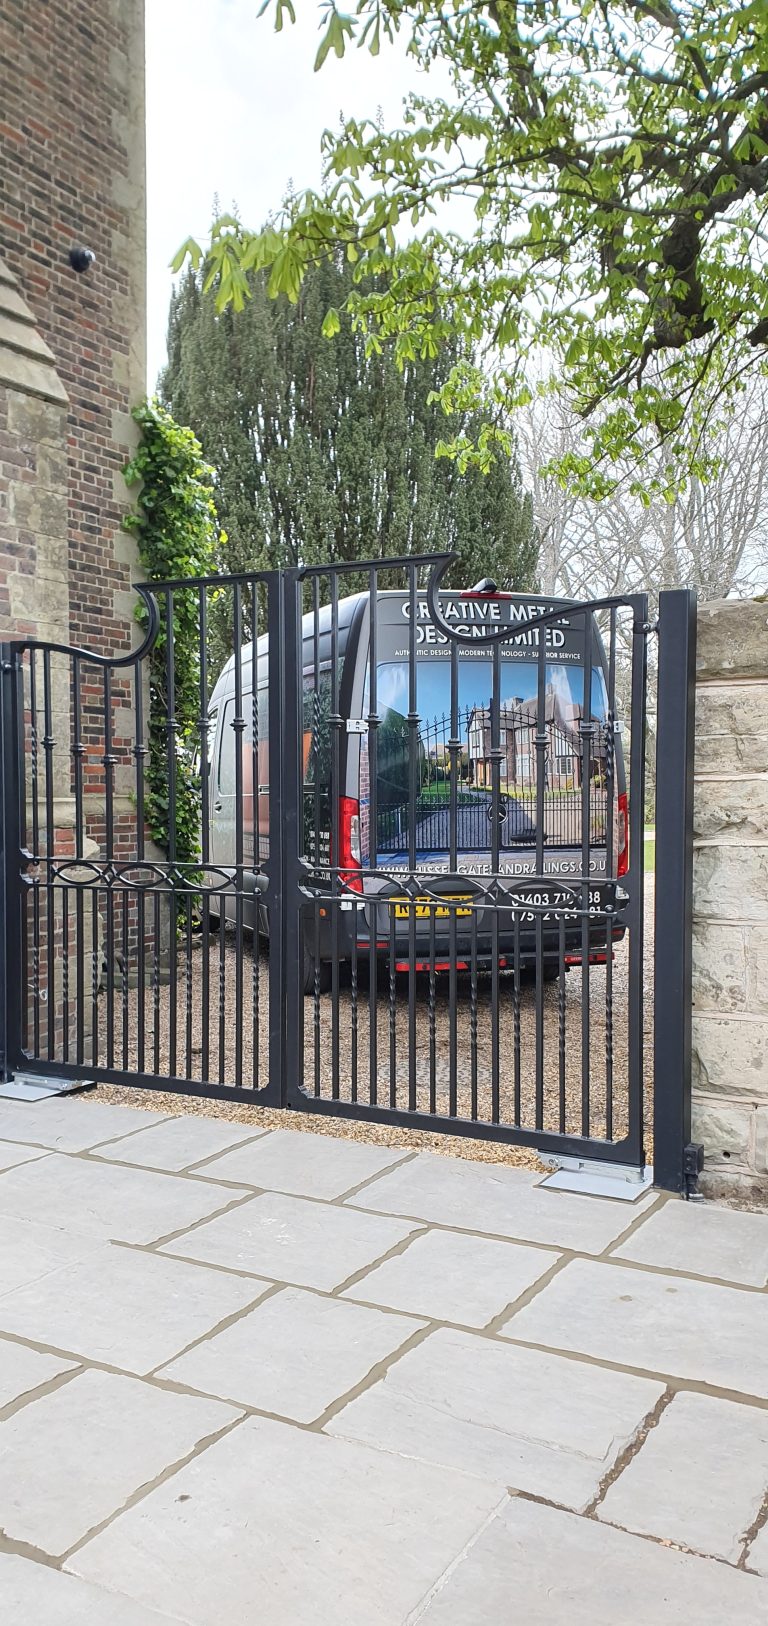 Automated Electric Metal Driveway Gates in Esher Surrey, Oxted, Caterham, Haywards Heath, Horsham, Brighton Sussex